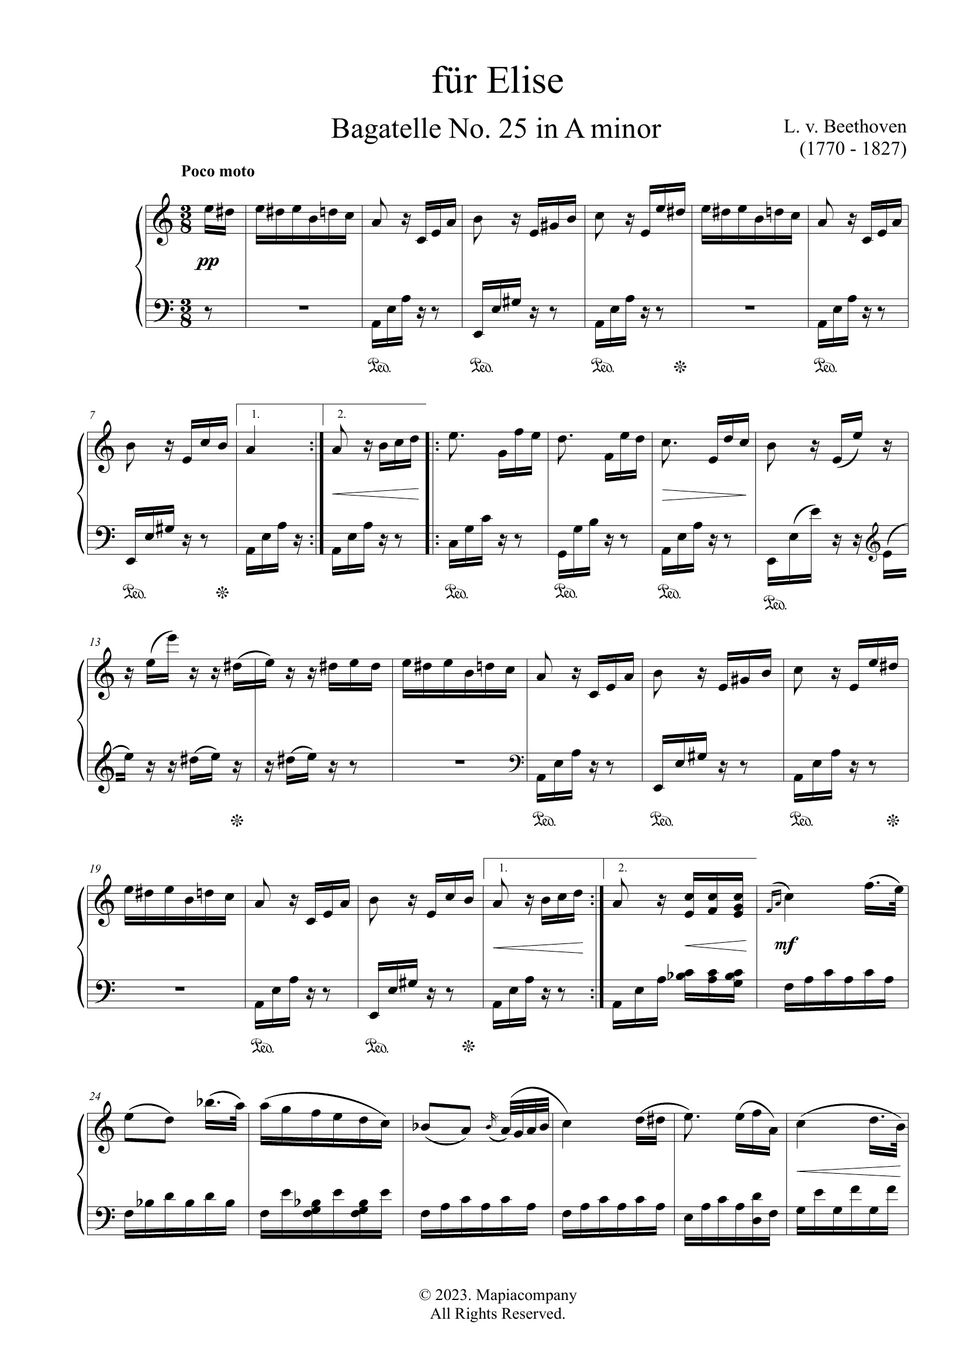 l-v-beethoven-fur-elise-by-beethoven-free-sheet-music-for-piano